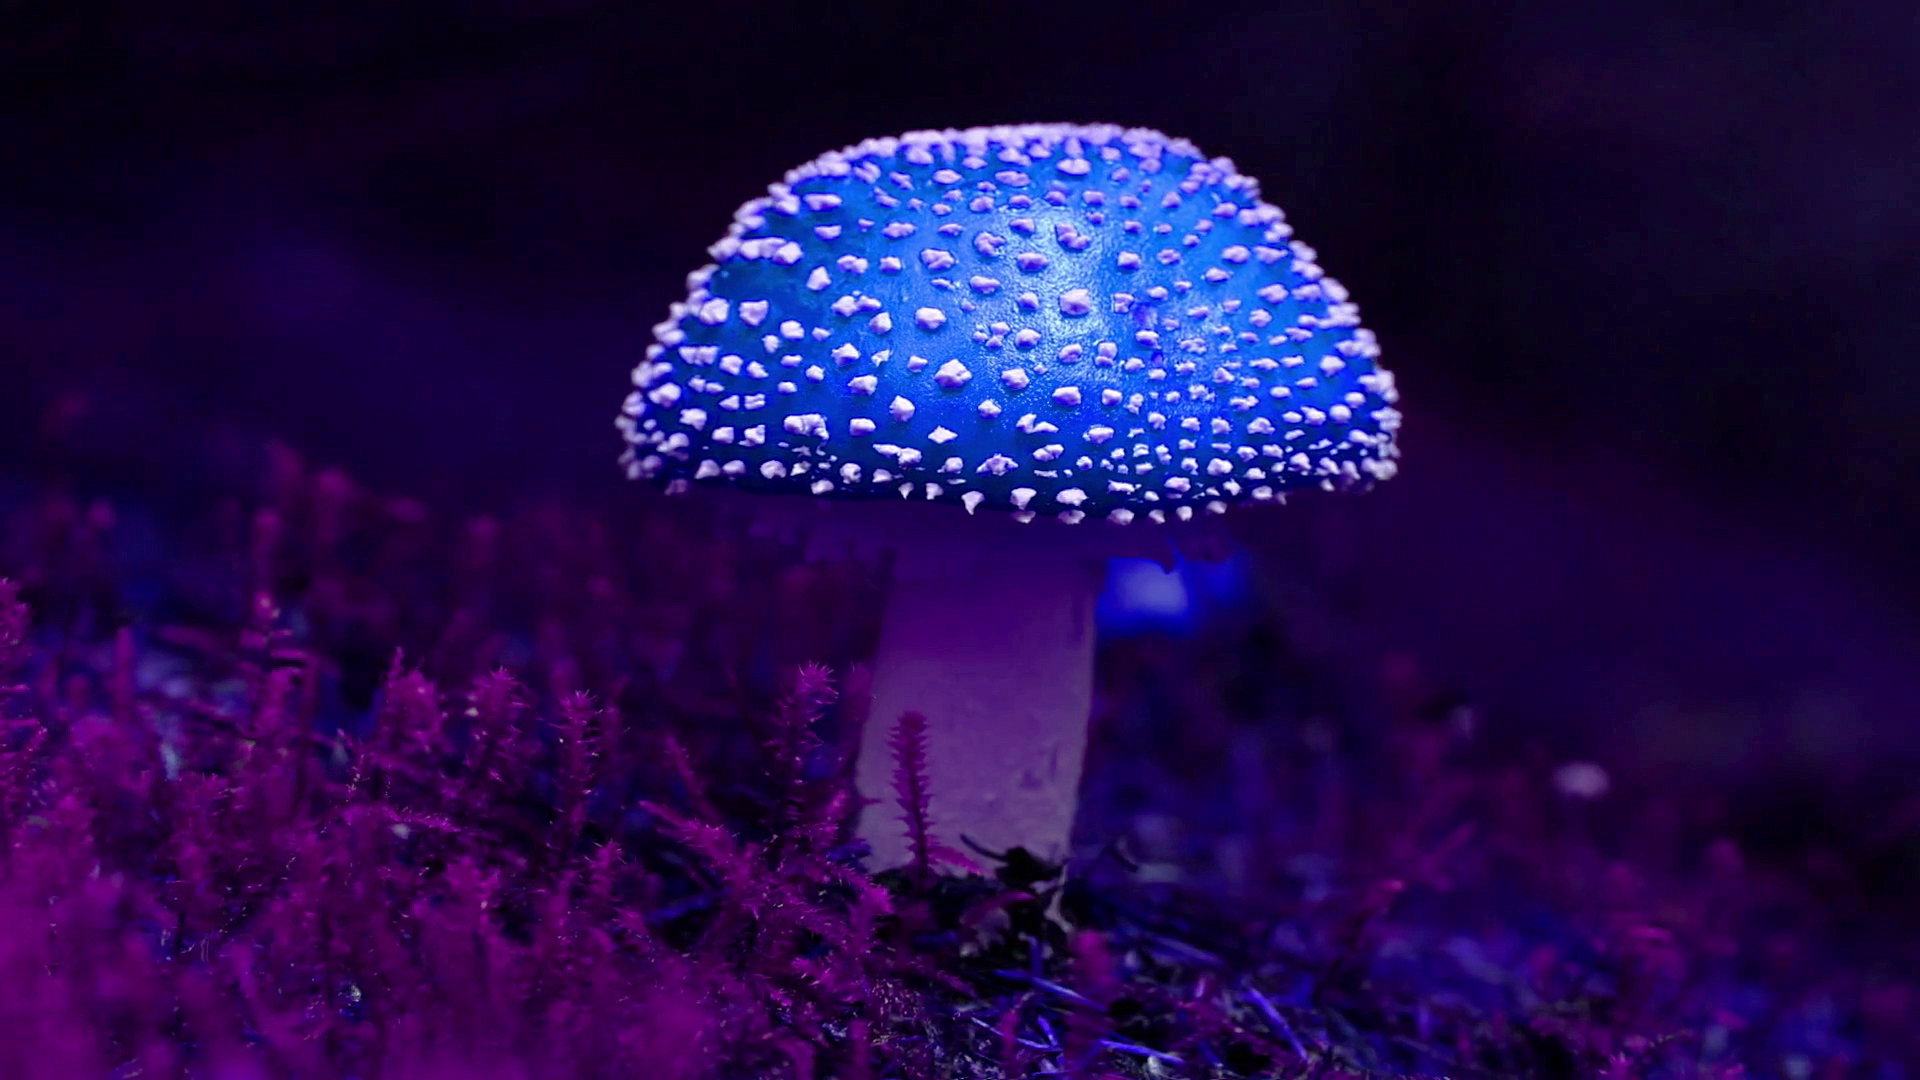 videoblocks-blue-magic-mushroom-hyper-rotating-time-lapse-amanita-muscaria-abstract-psychedelic_bsx7fy7-z_thumbnail-full01.jpg